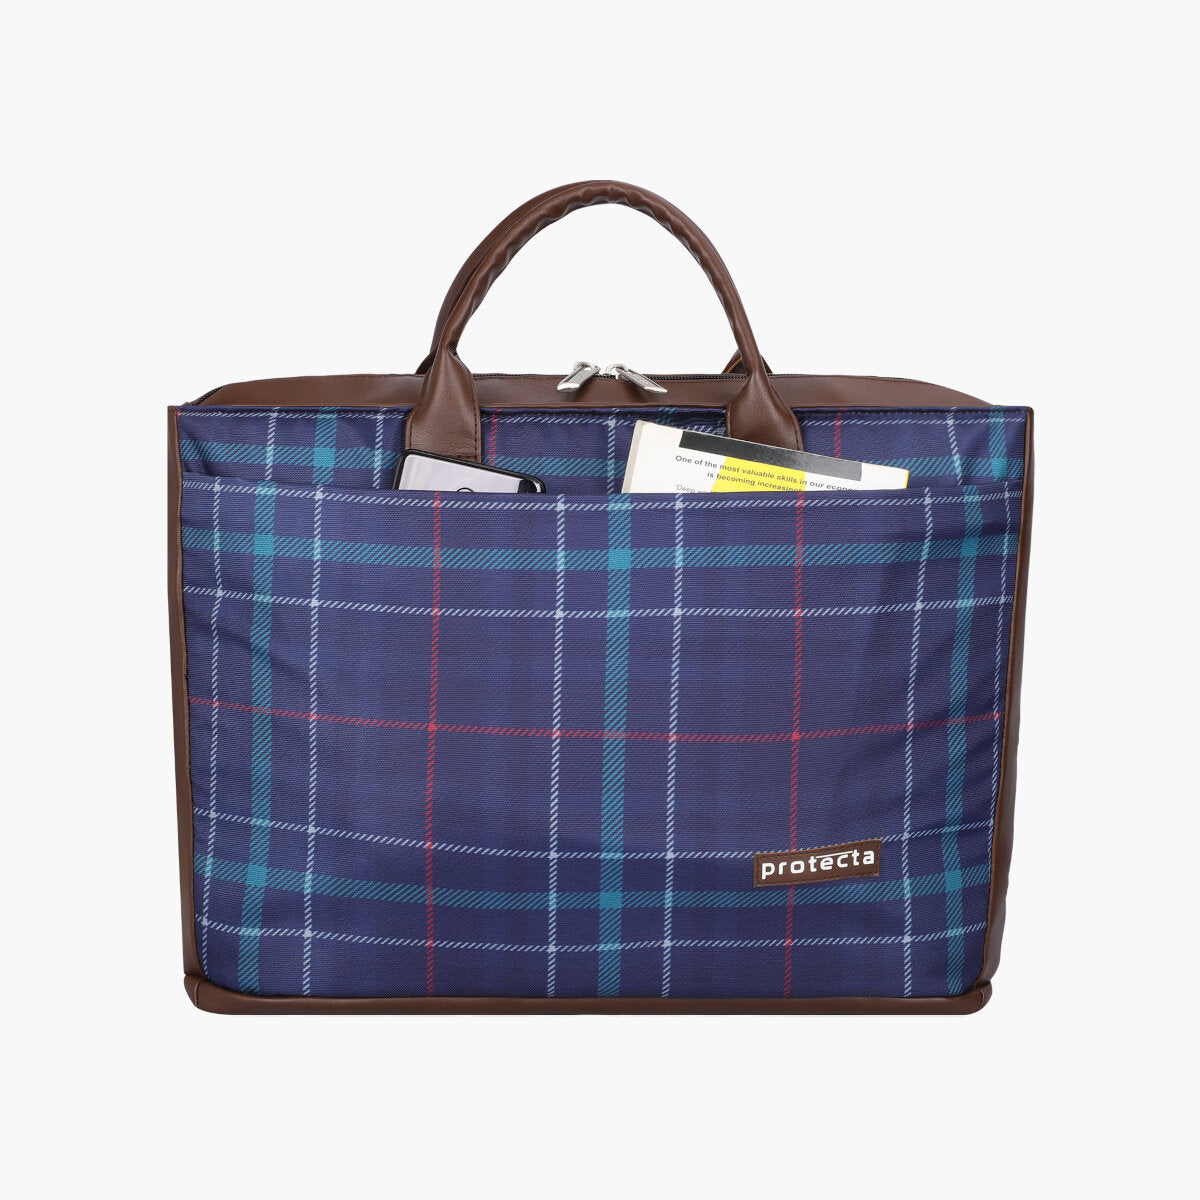 Plaid Print | Protecta Evenly Poised Office Laptop Bag for Women - 5